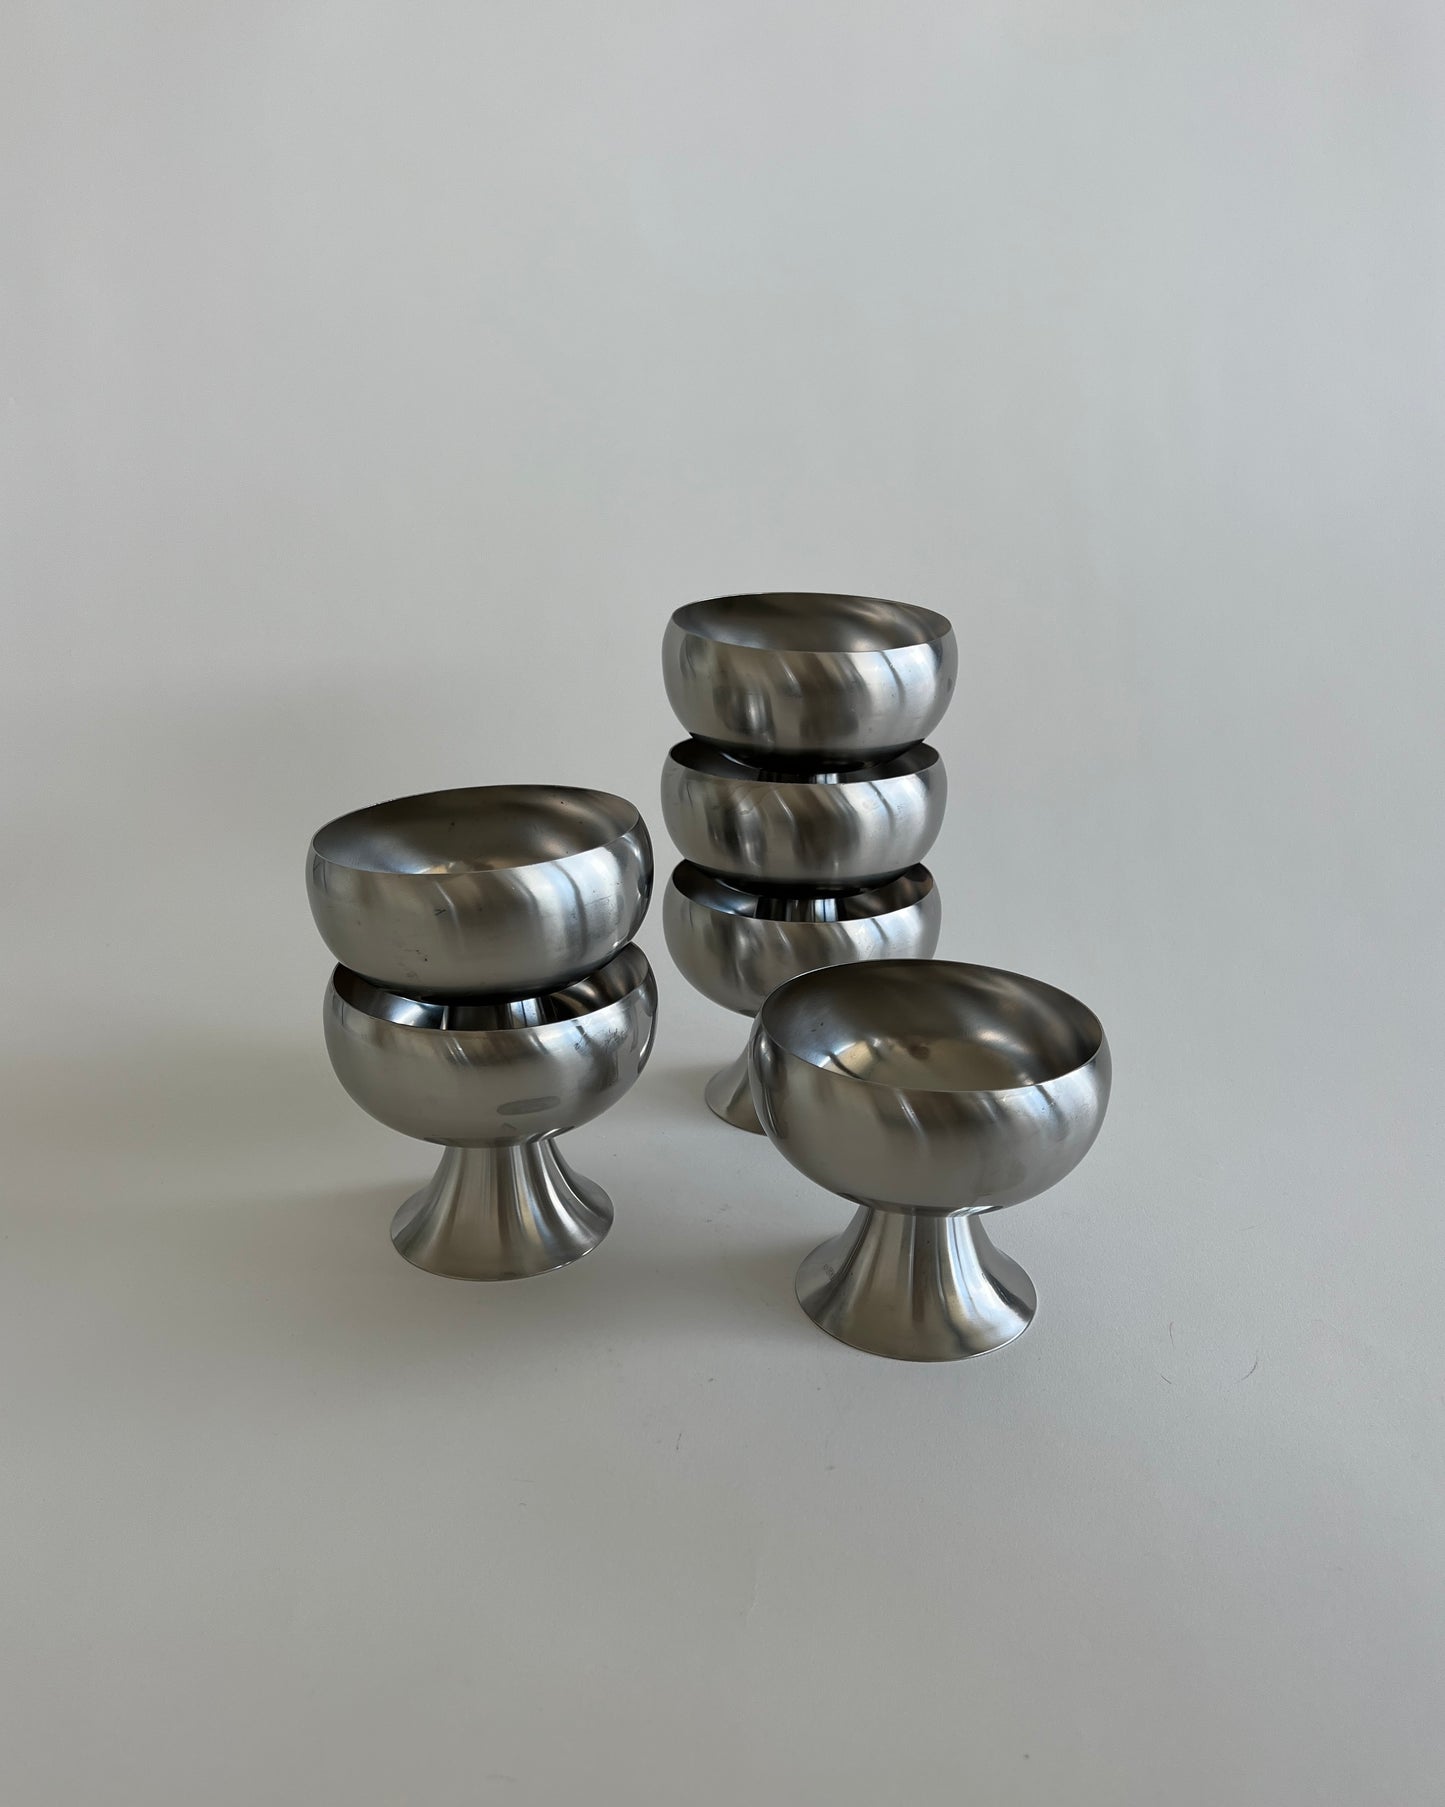 Big Stainless Steel Cups